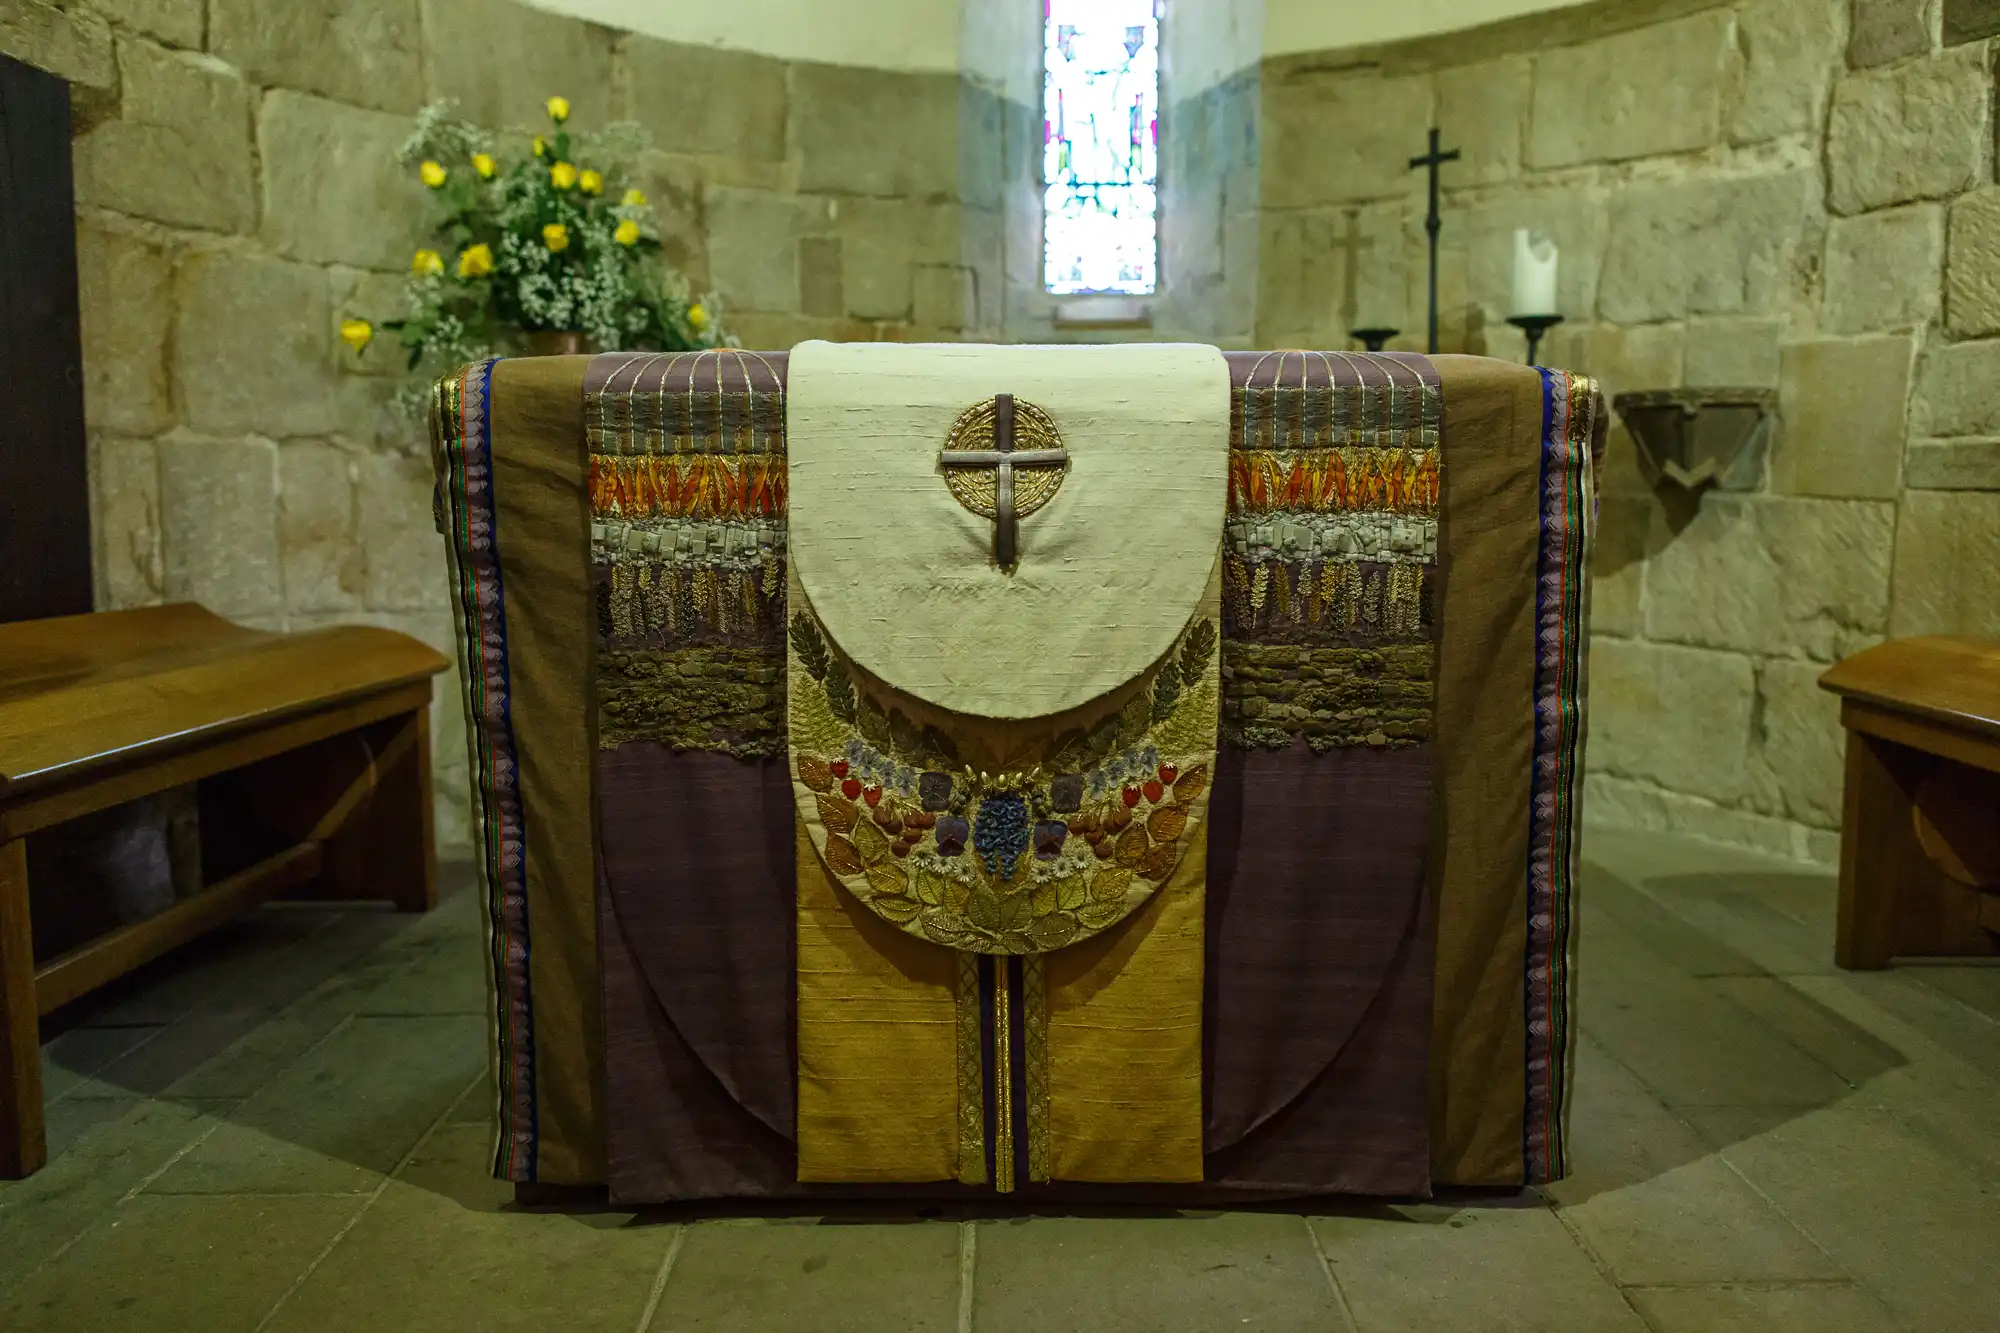 Altar with a decorative cloth and a cross emblem in the center, situated in a small, stone-walled chapel with a stained glass window in the background.